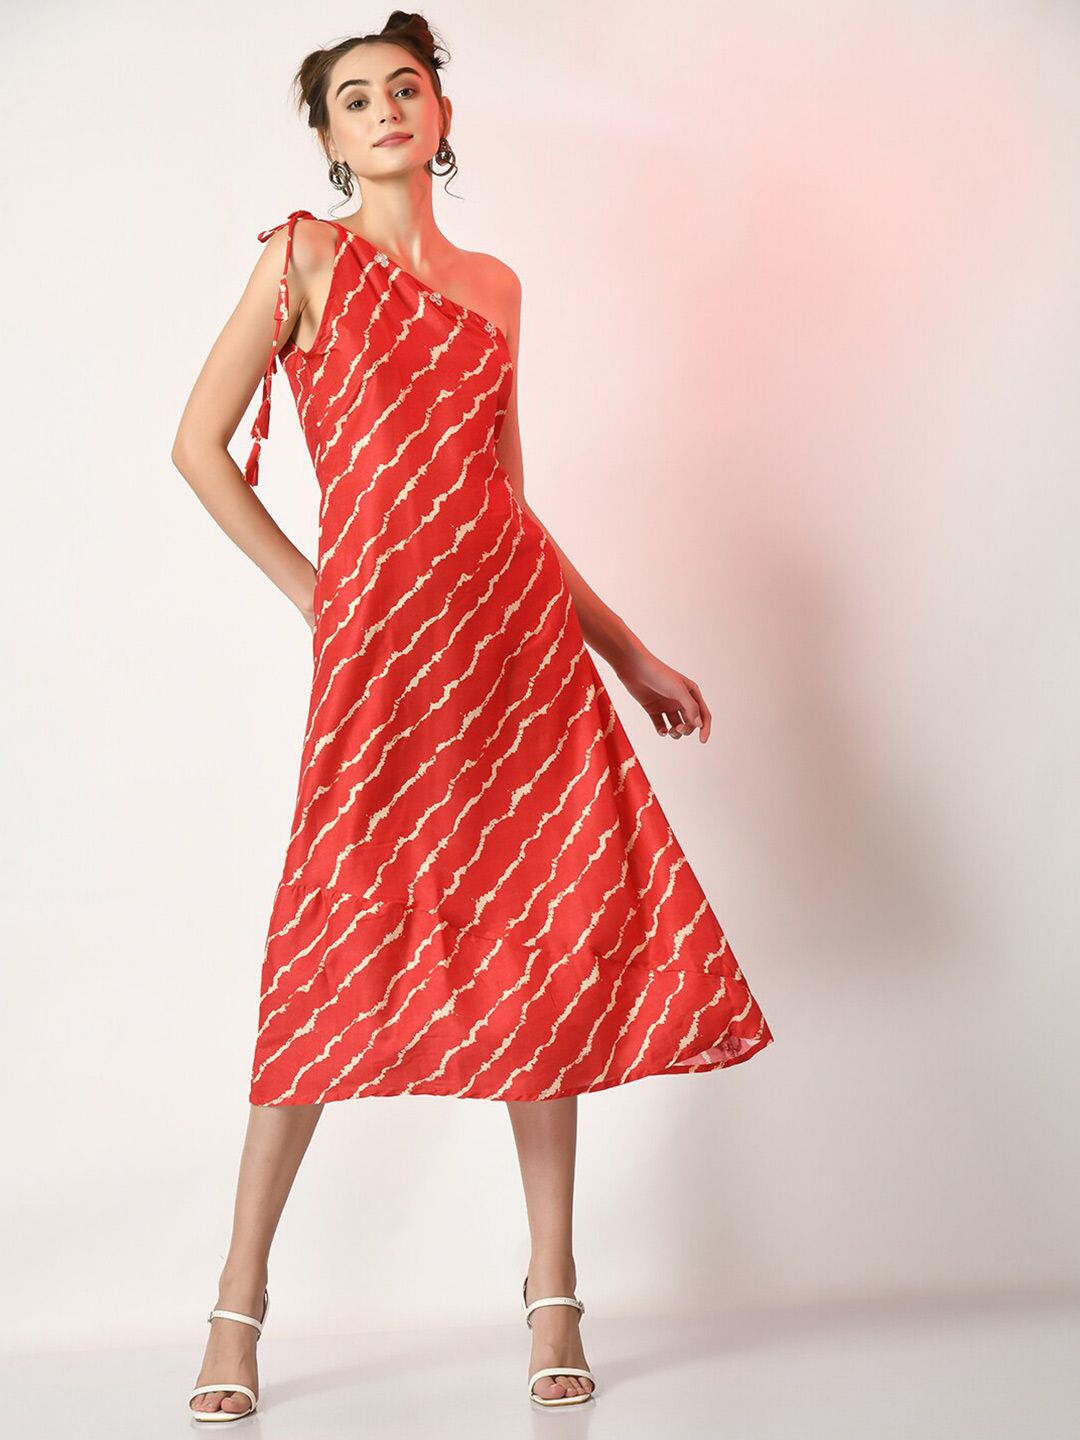 Sangria Ethnic Motifs Printed One Shoulder A-Line Midi Dress Price in India